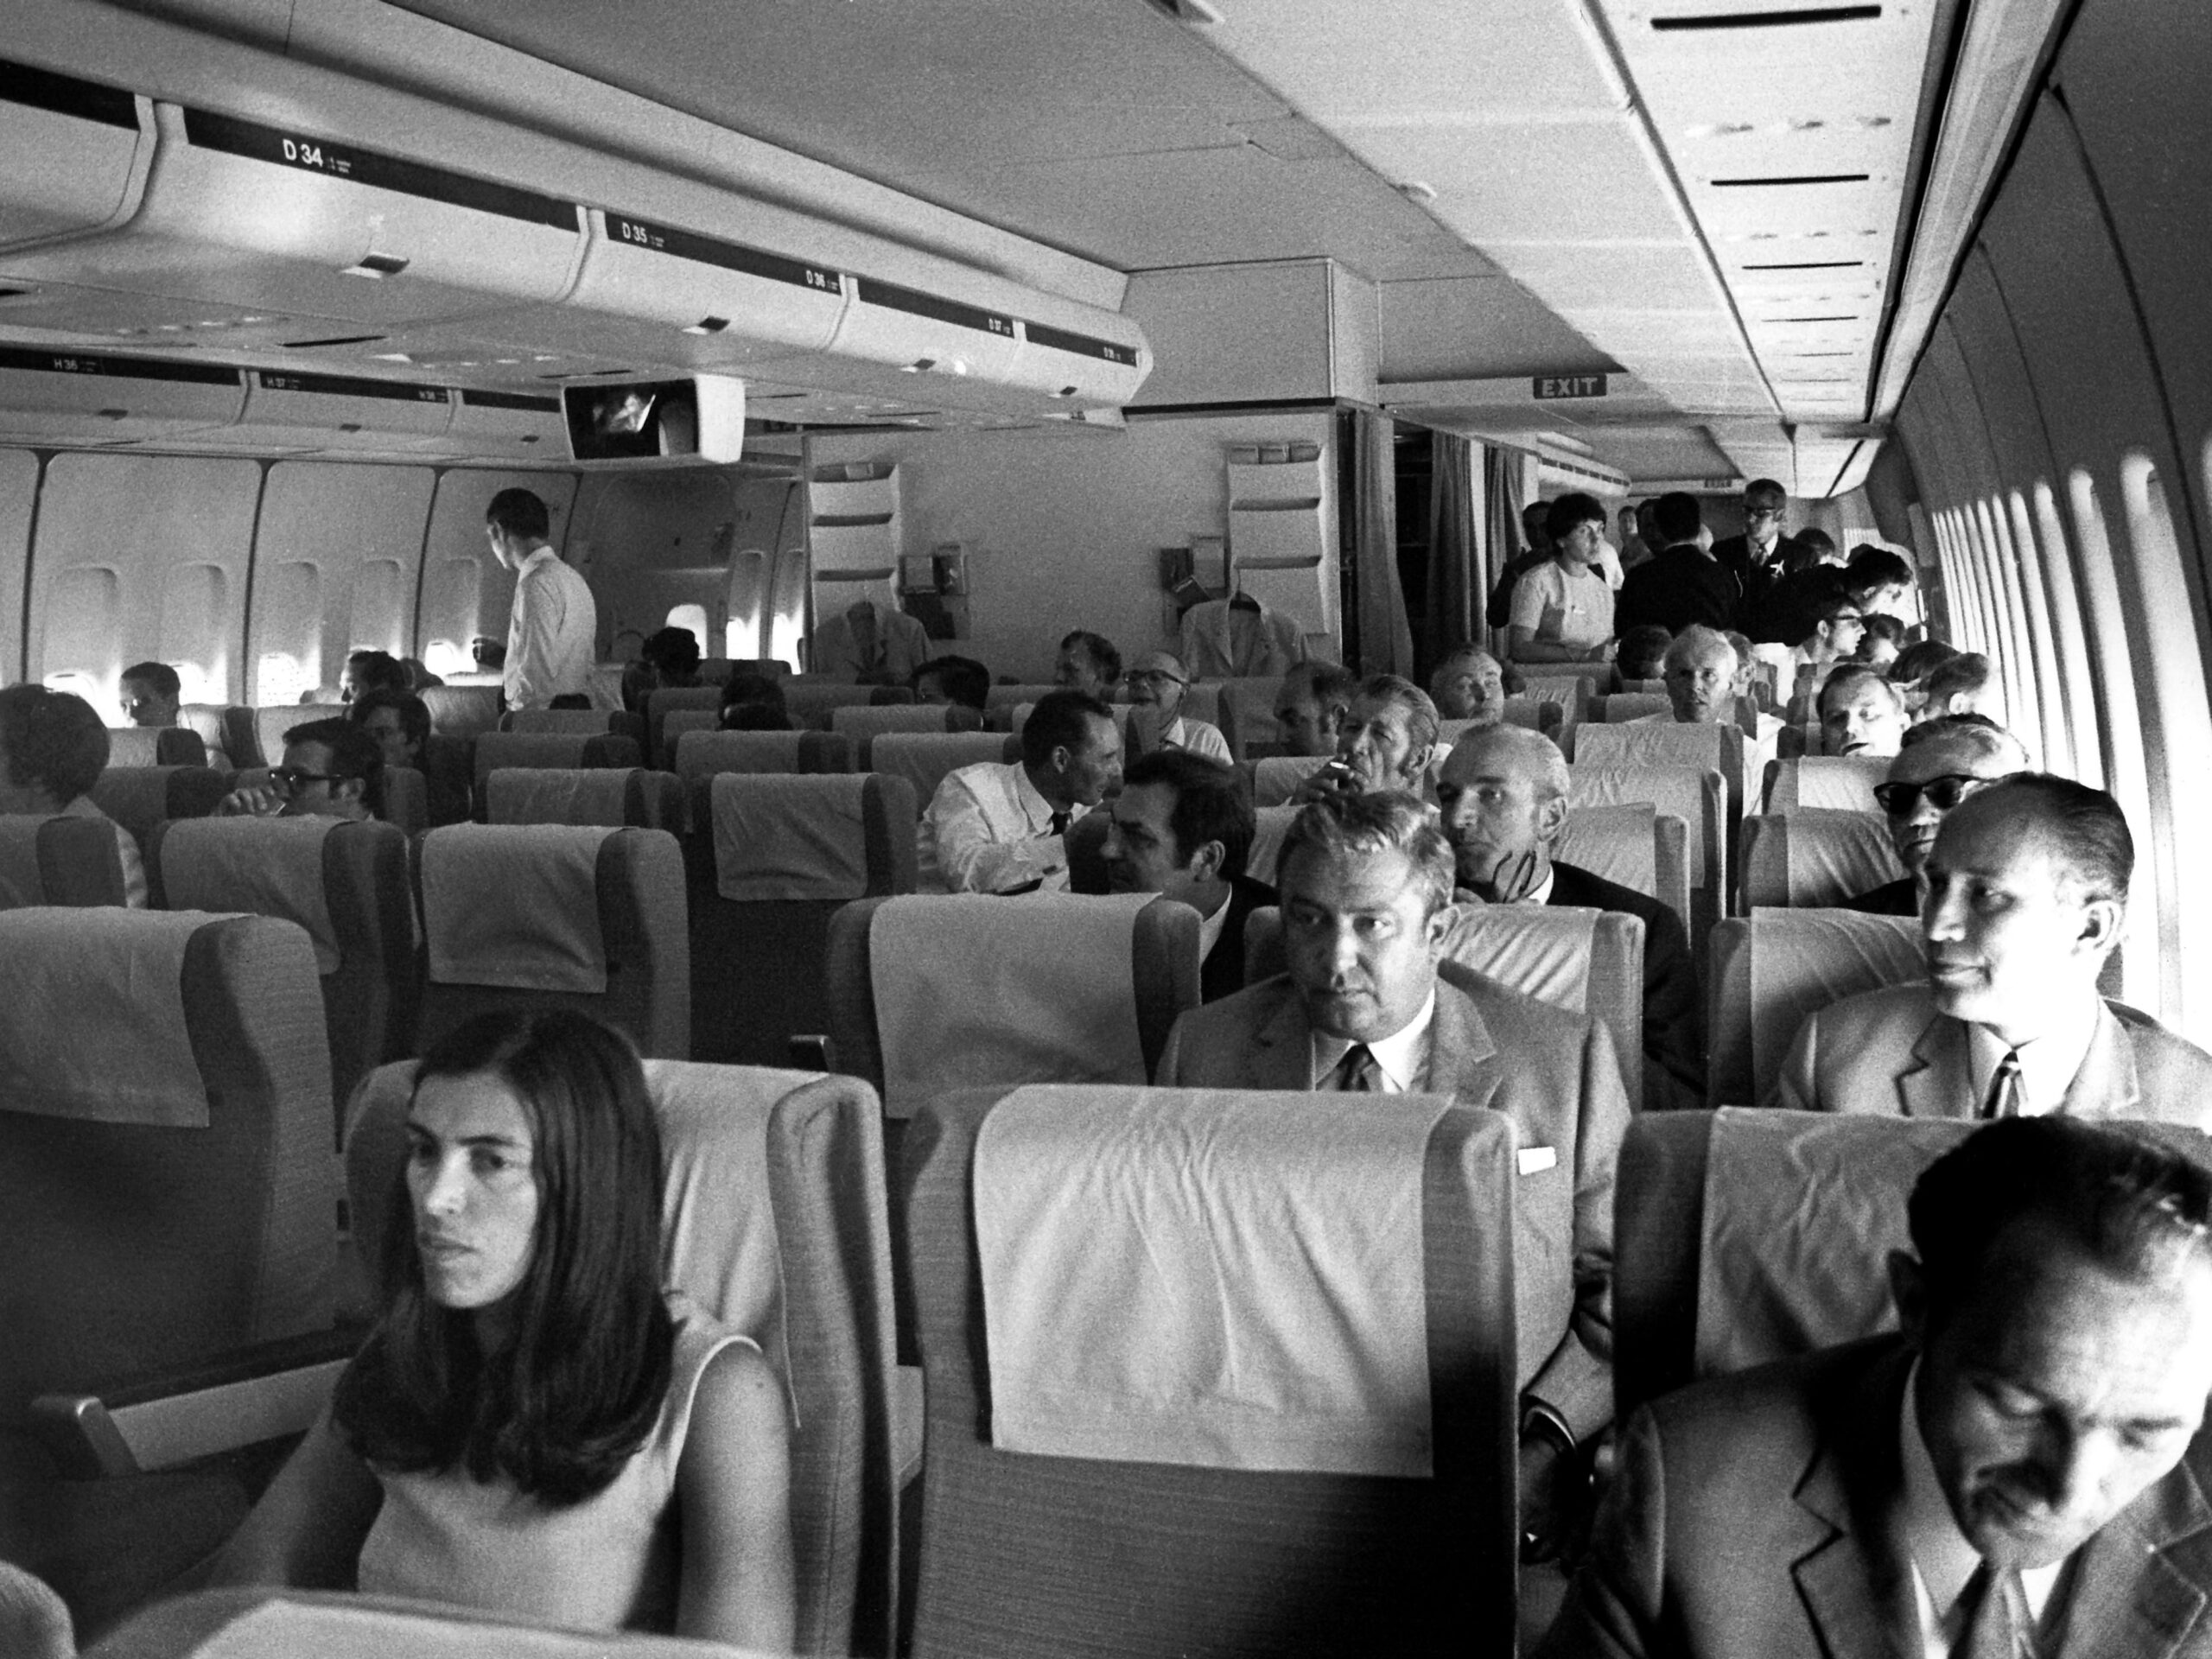 Passengers inside the cabin of a 747 in 1970.